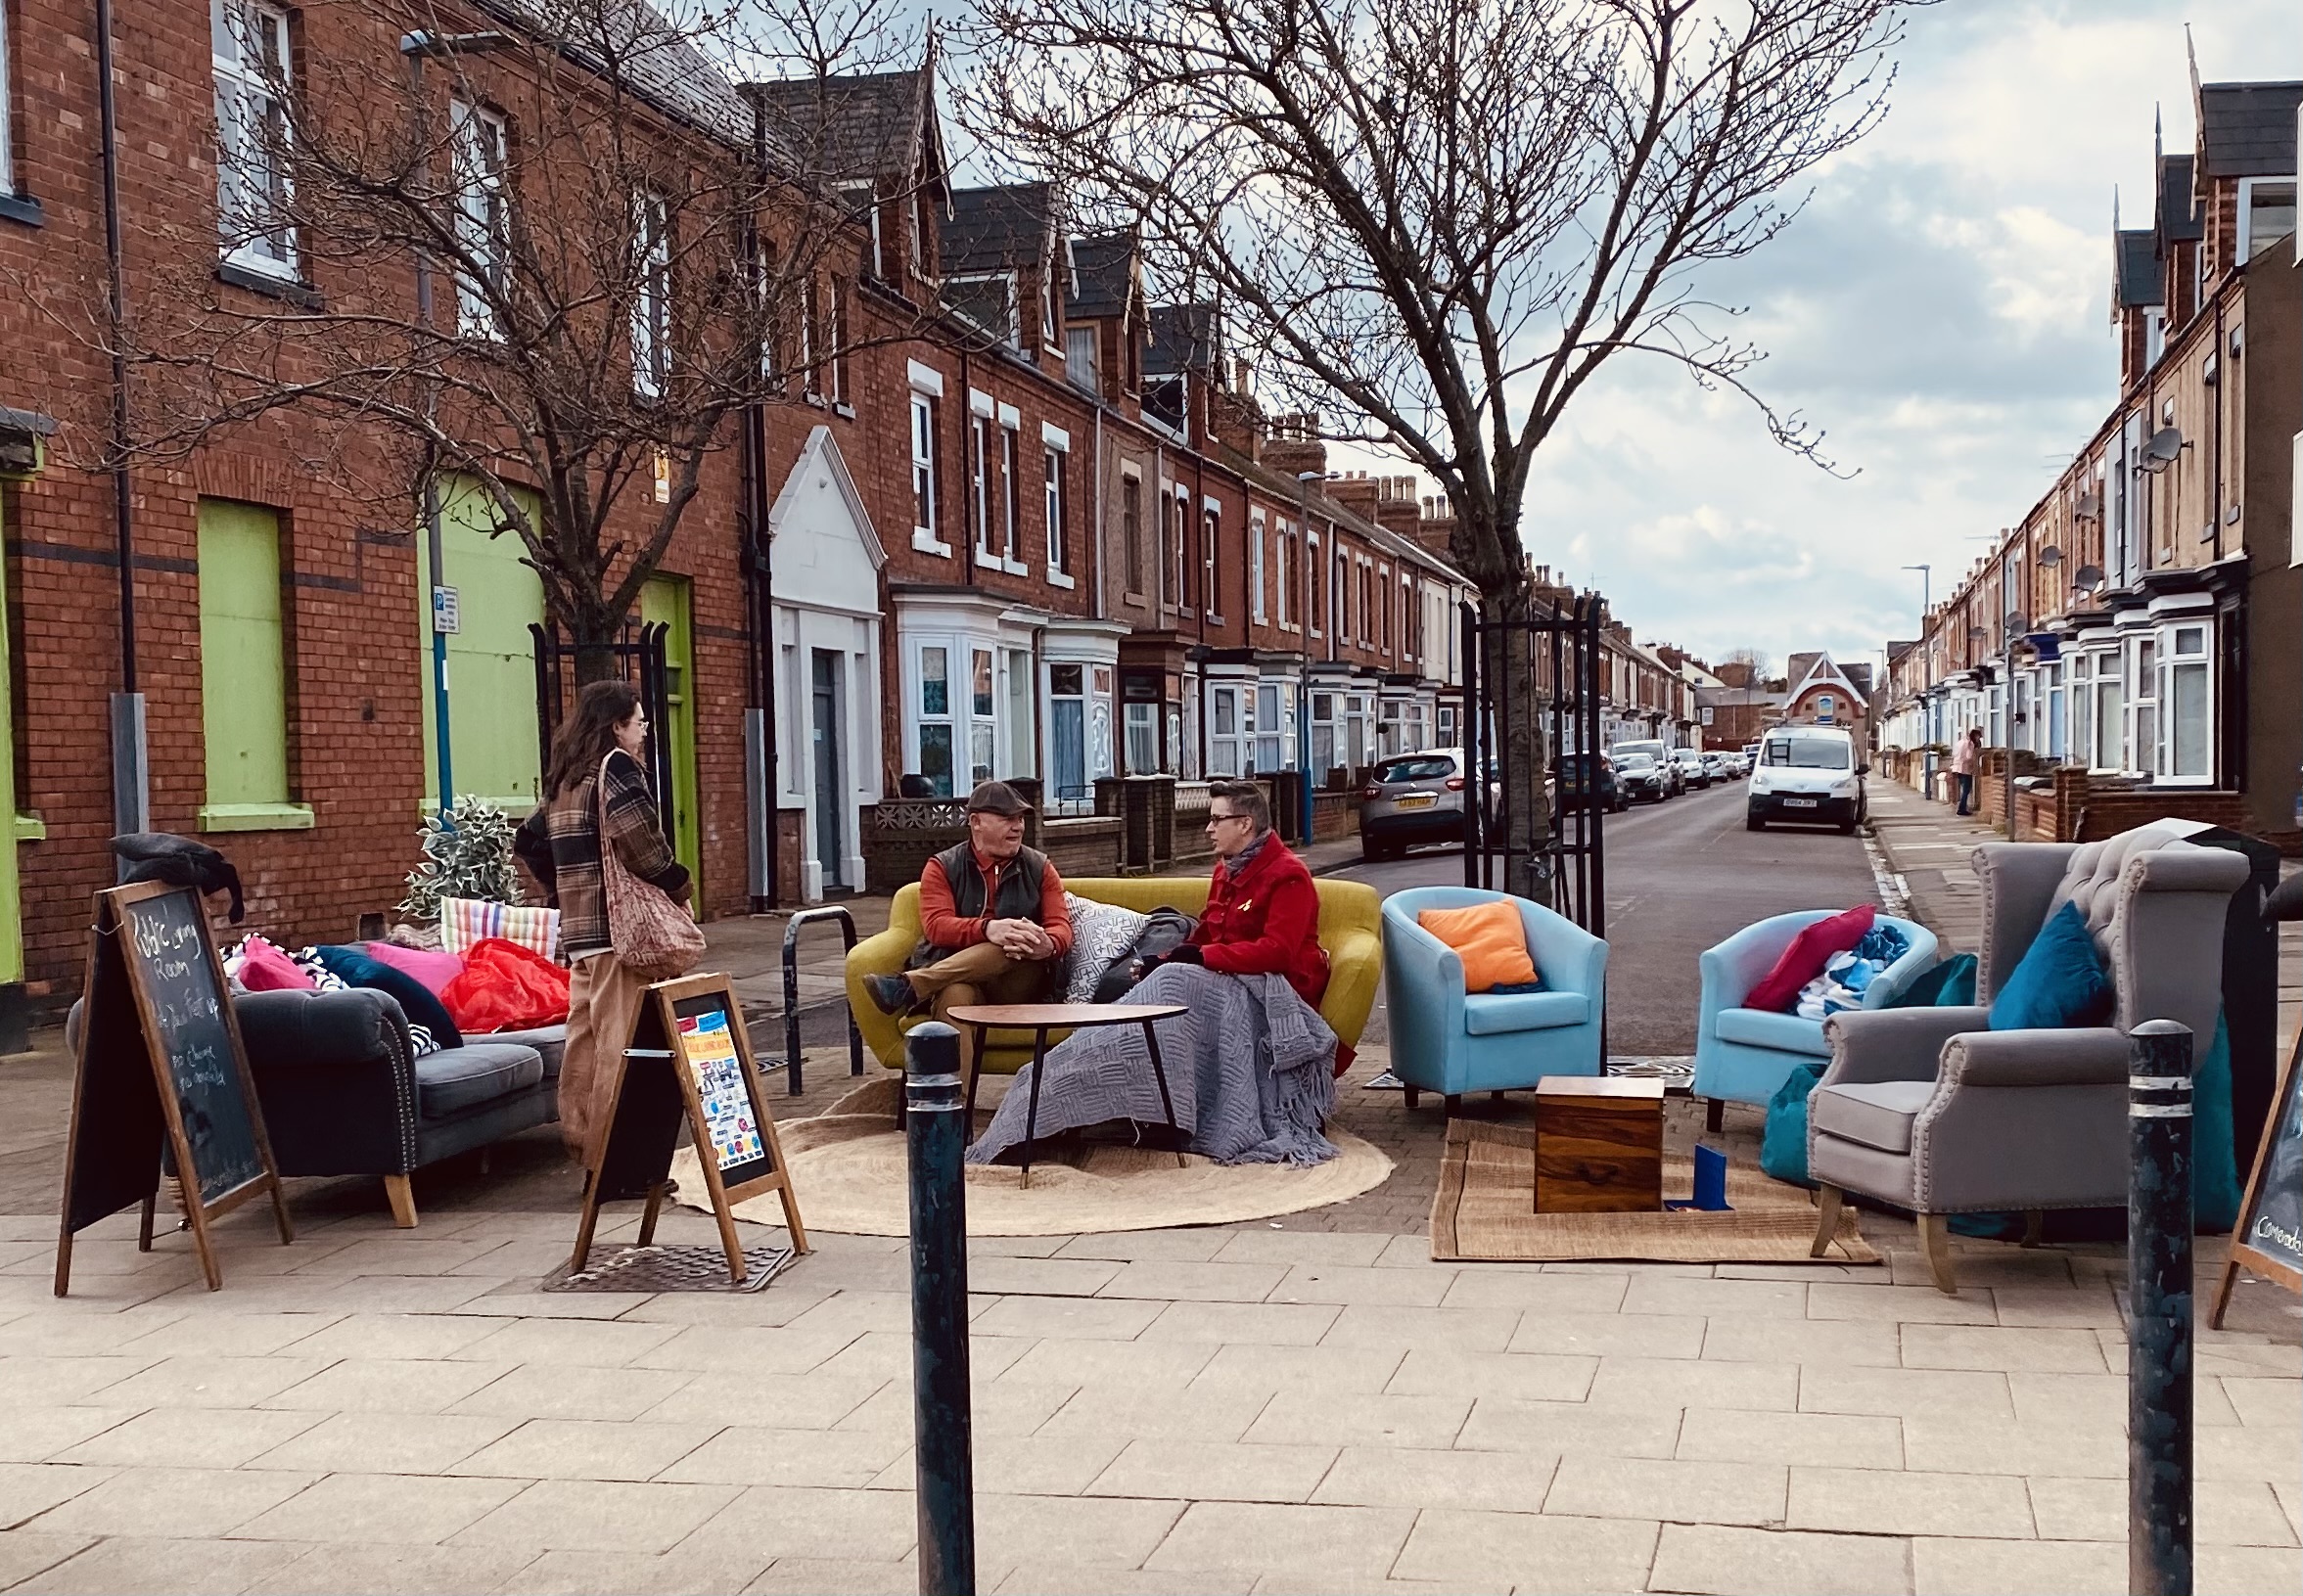 People sat on couches in an outdoor living room, having a chat in a suburban street